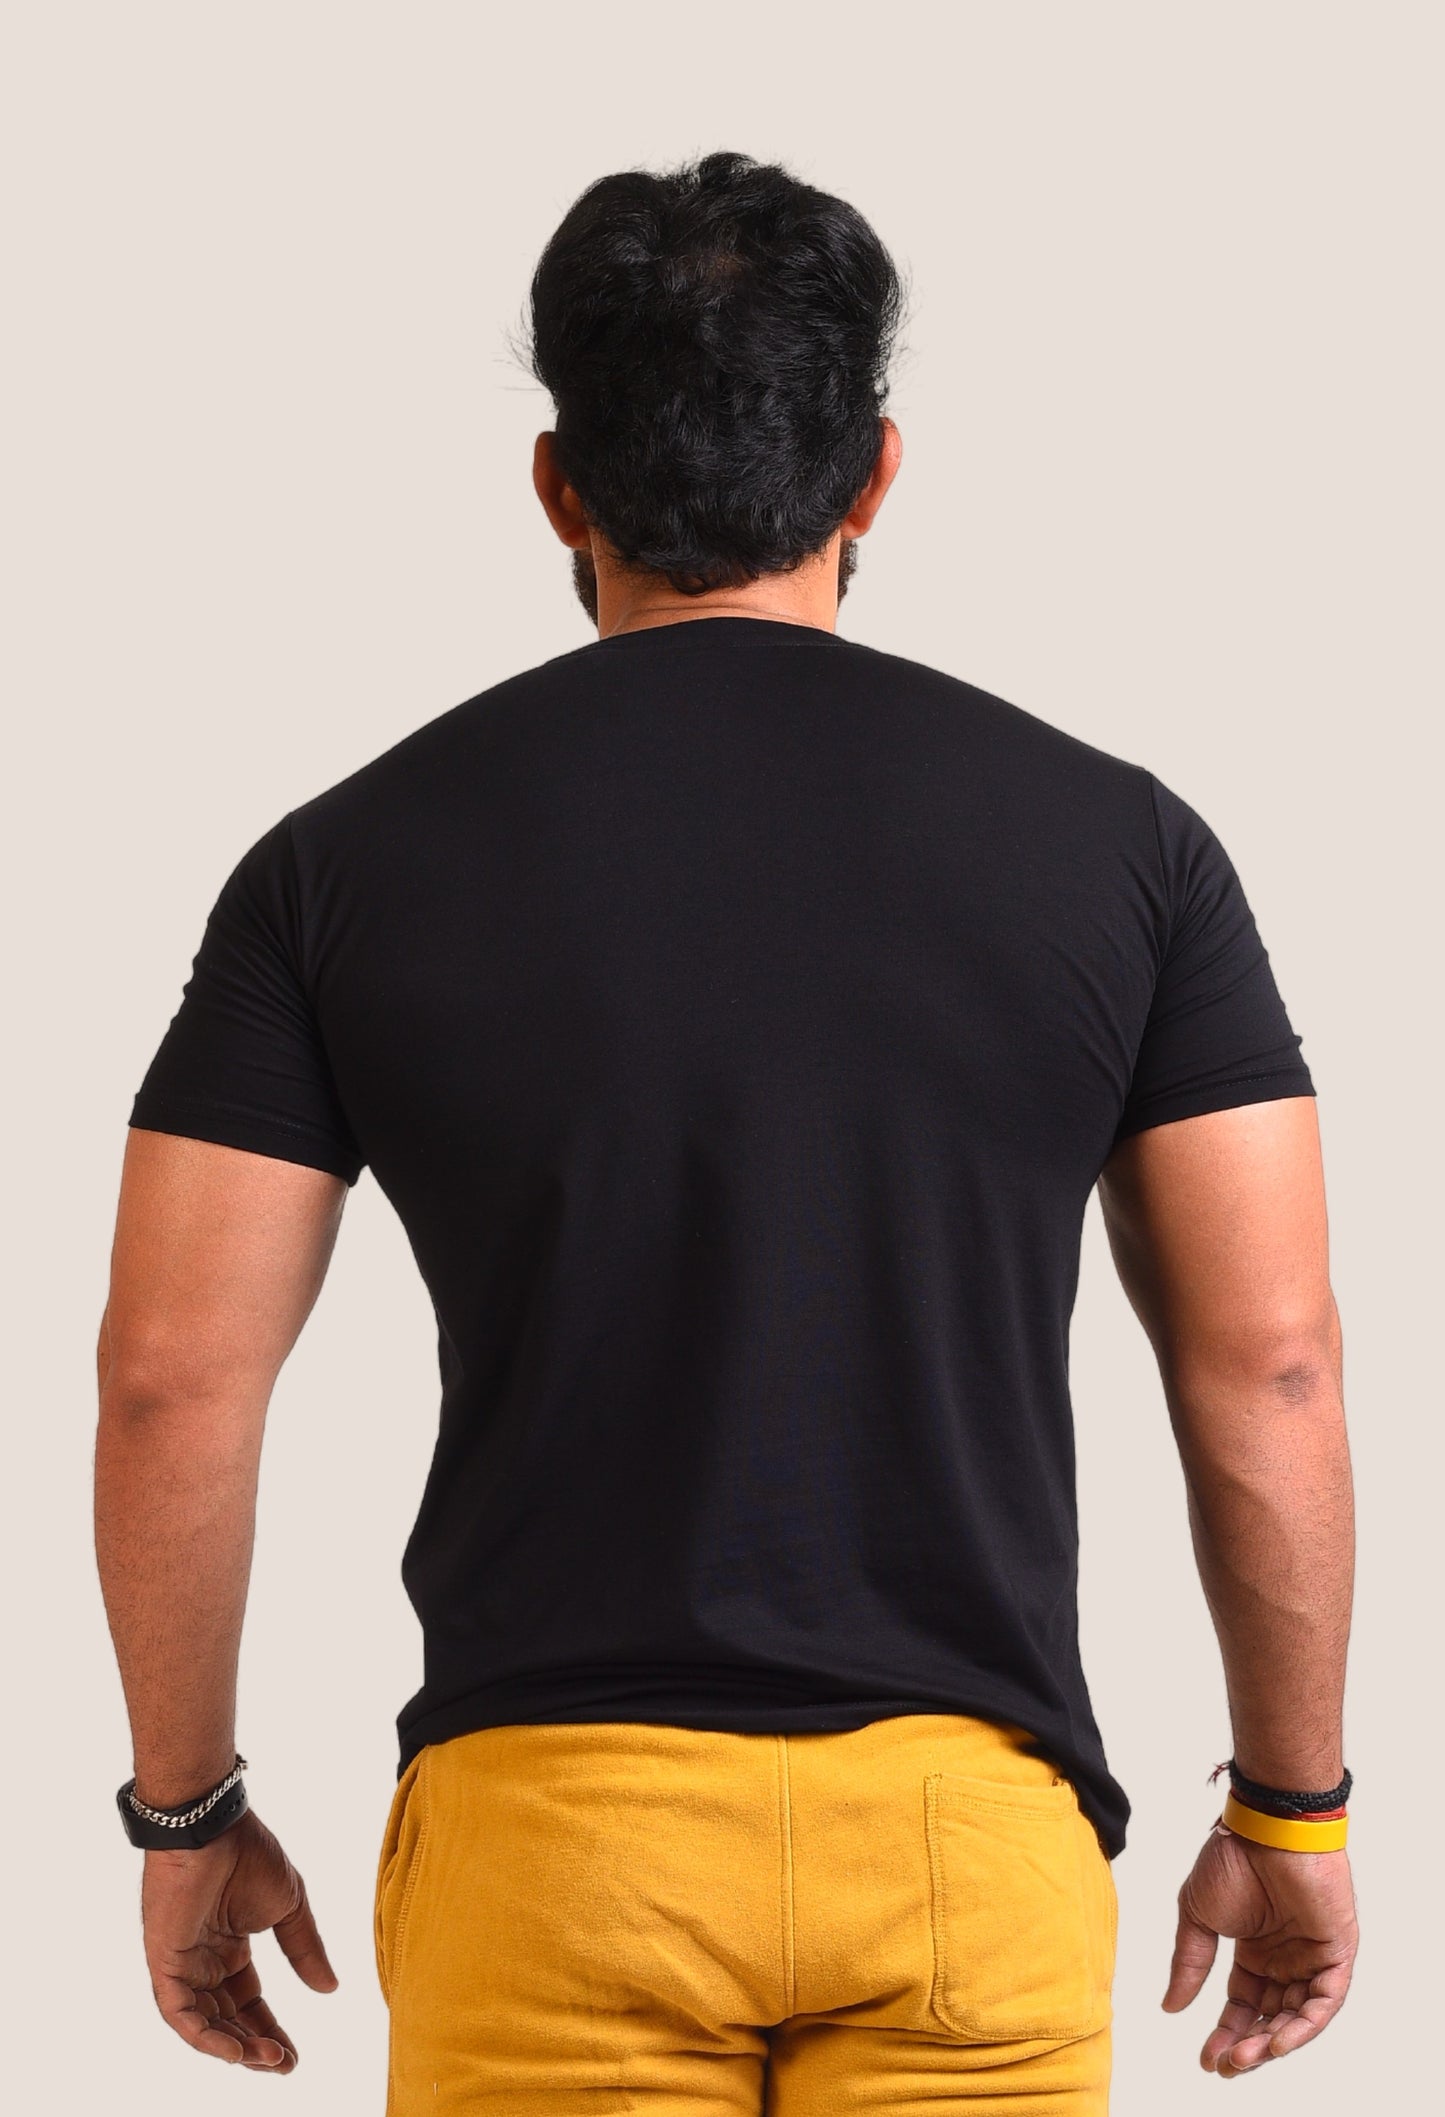 Gym T Shirt - Lift Heavy Shit - Men T-Shirt with premium cotton Lycra. The Sports T Shirt by Strong Soul